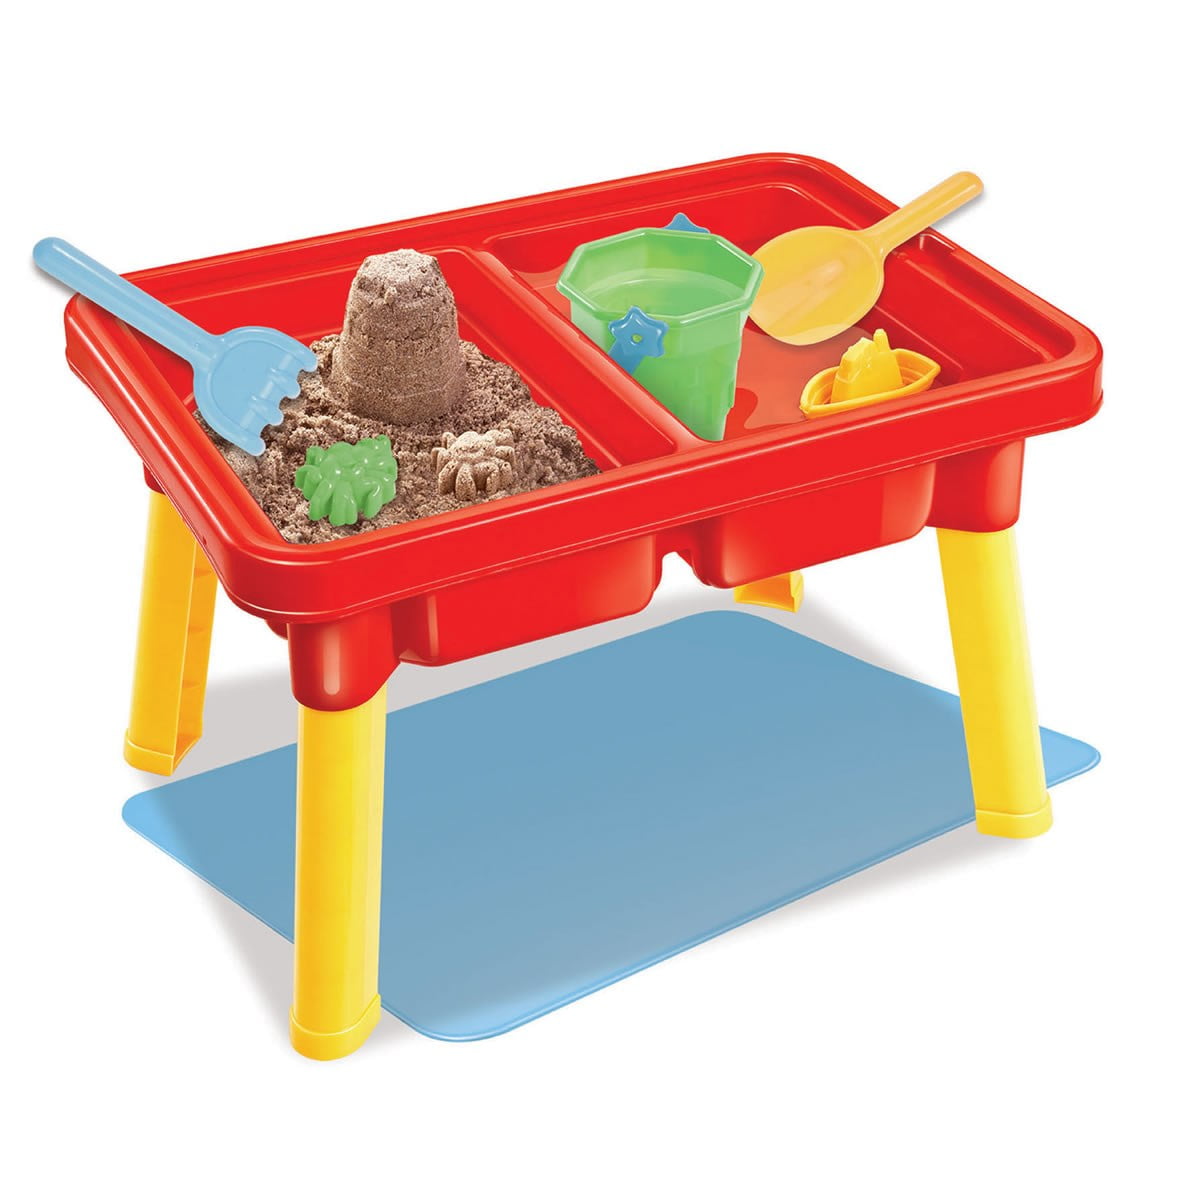 Fridja Sand Water Table for Toddlers 3 in 1 Sand Table and Water Play Table Kids Table Activity Sensory Play Table Beach Sand Water Toy